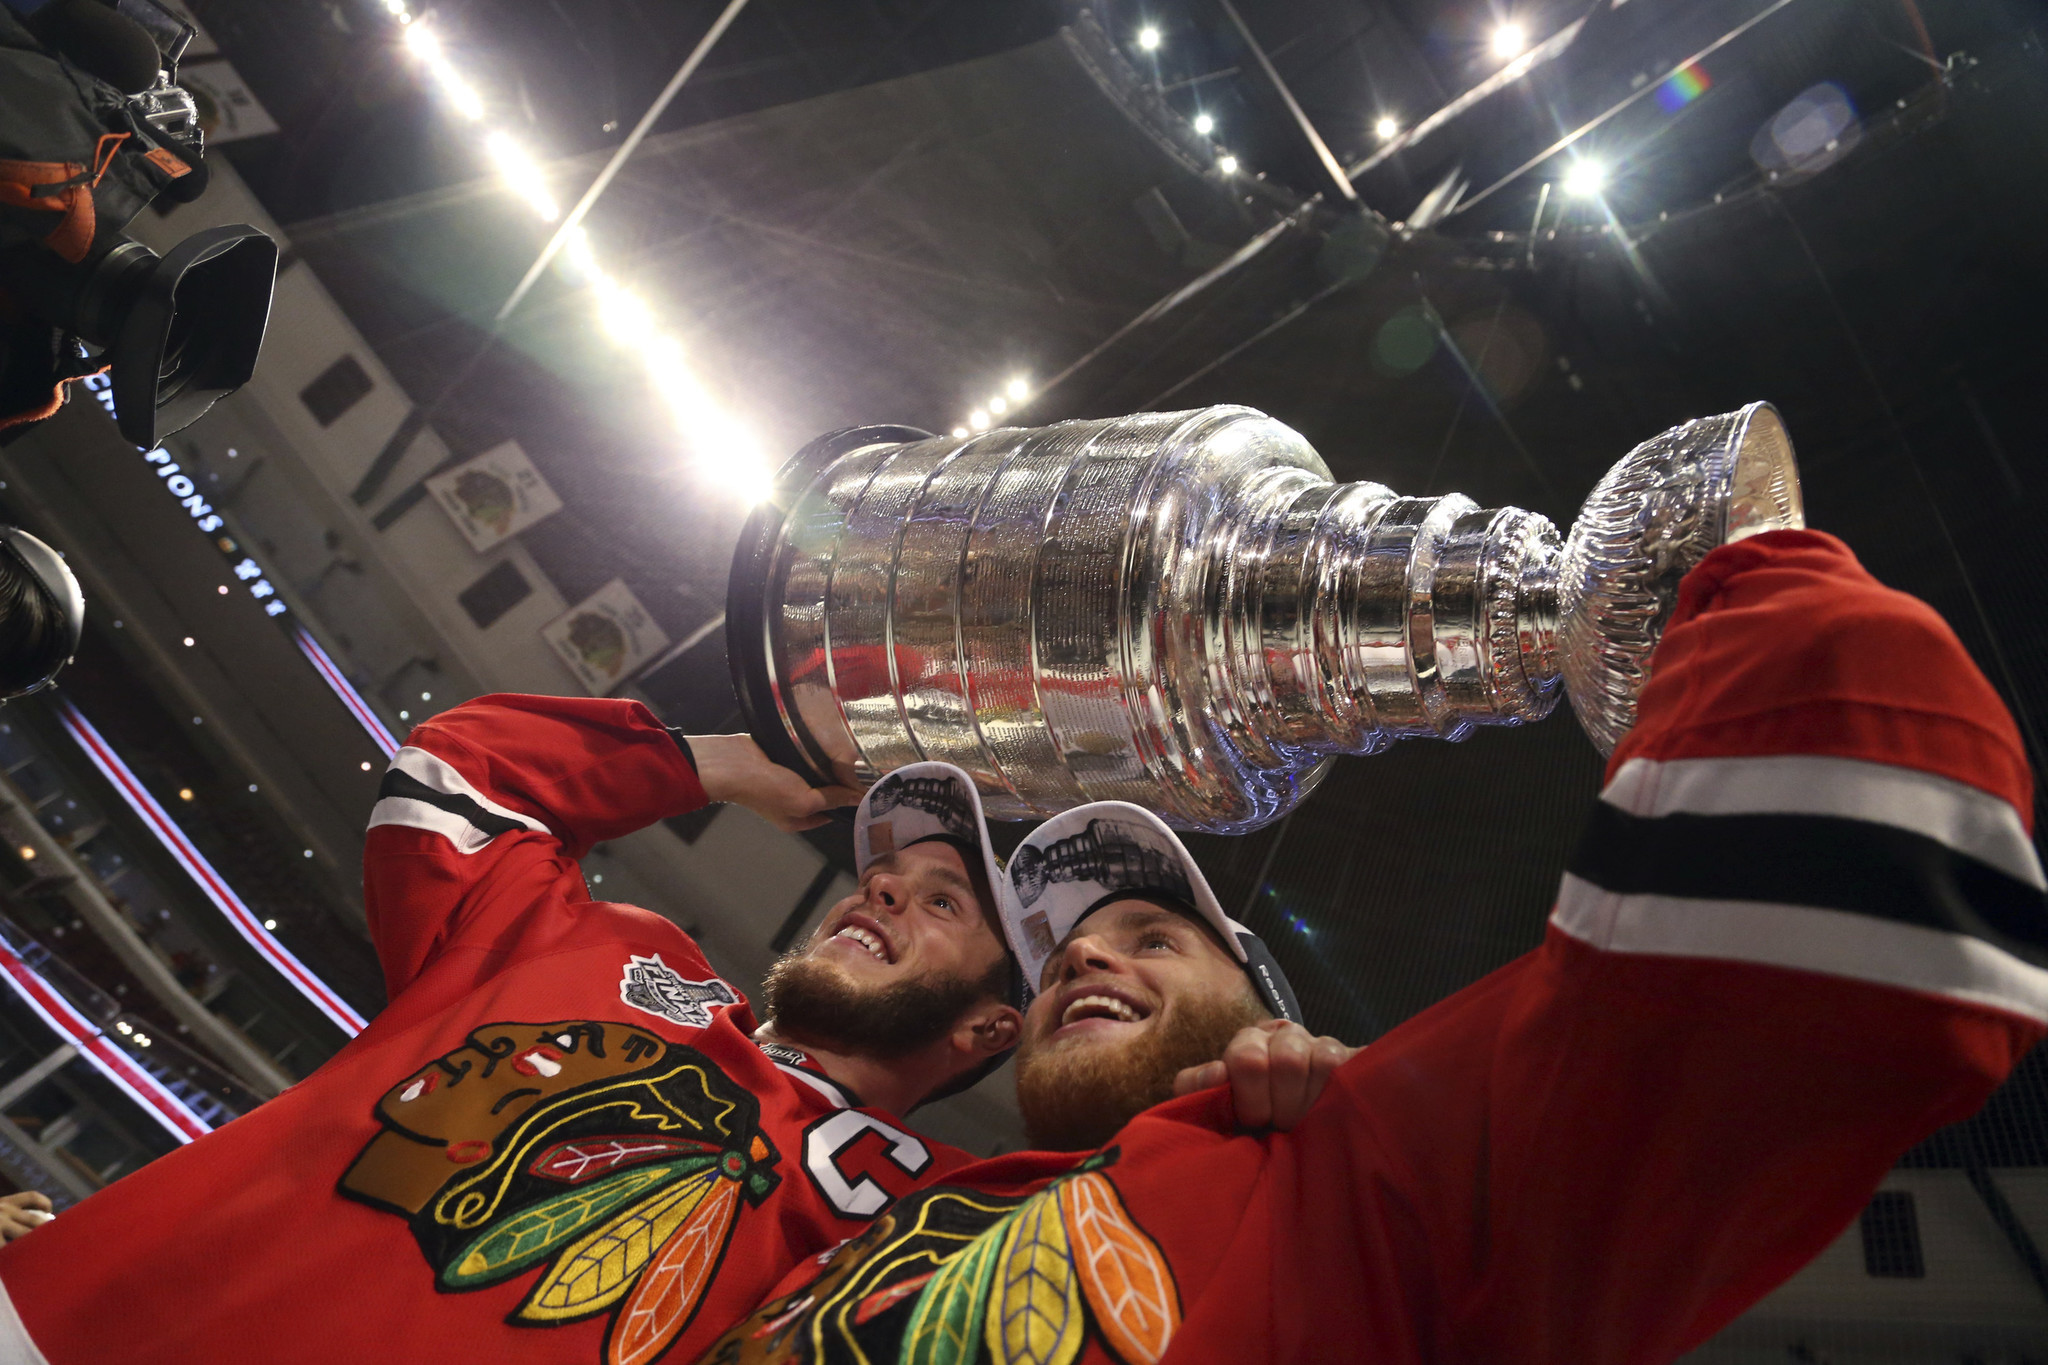 Patrick Kane inspires young kid with haircut - Chicago Sun-Times